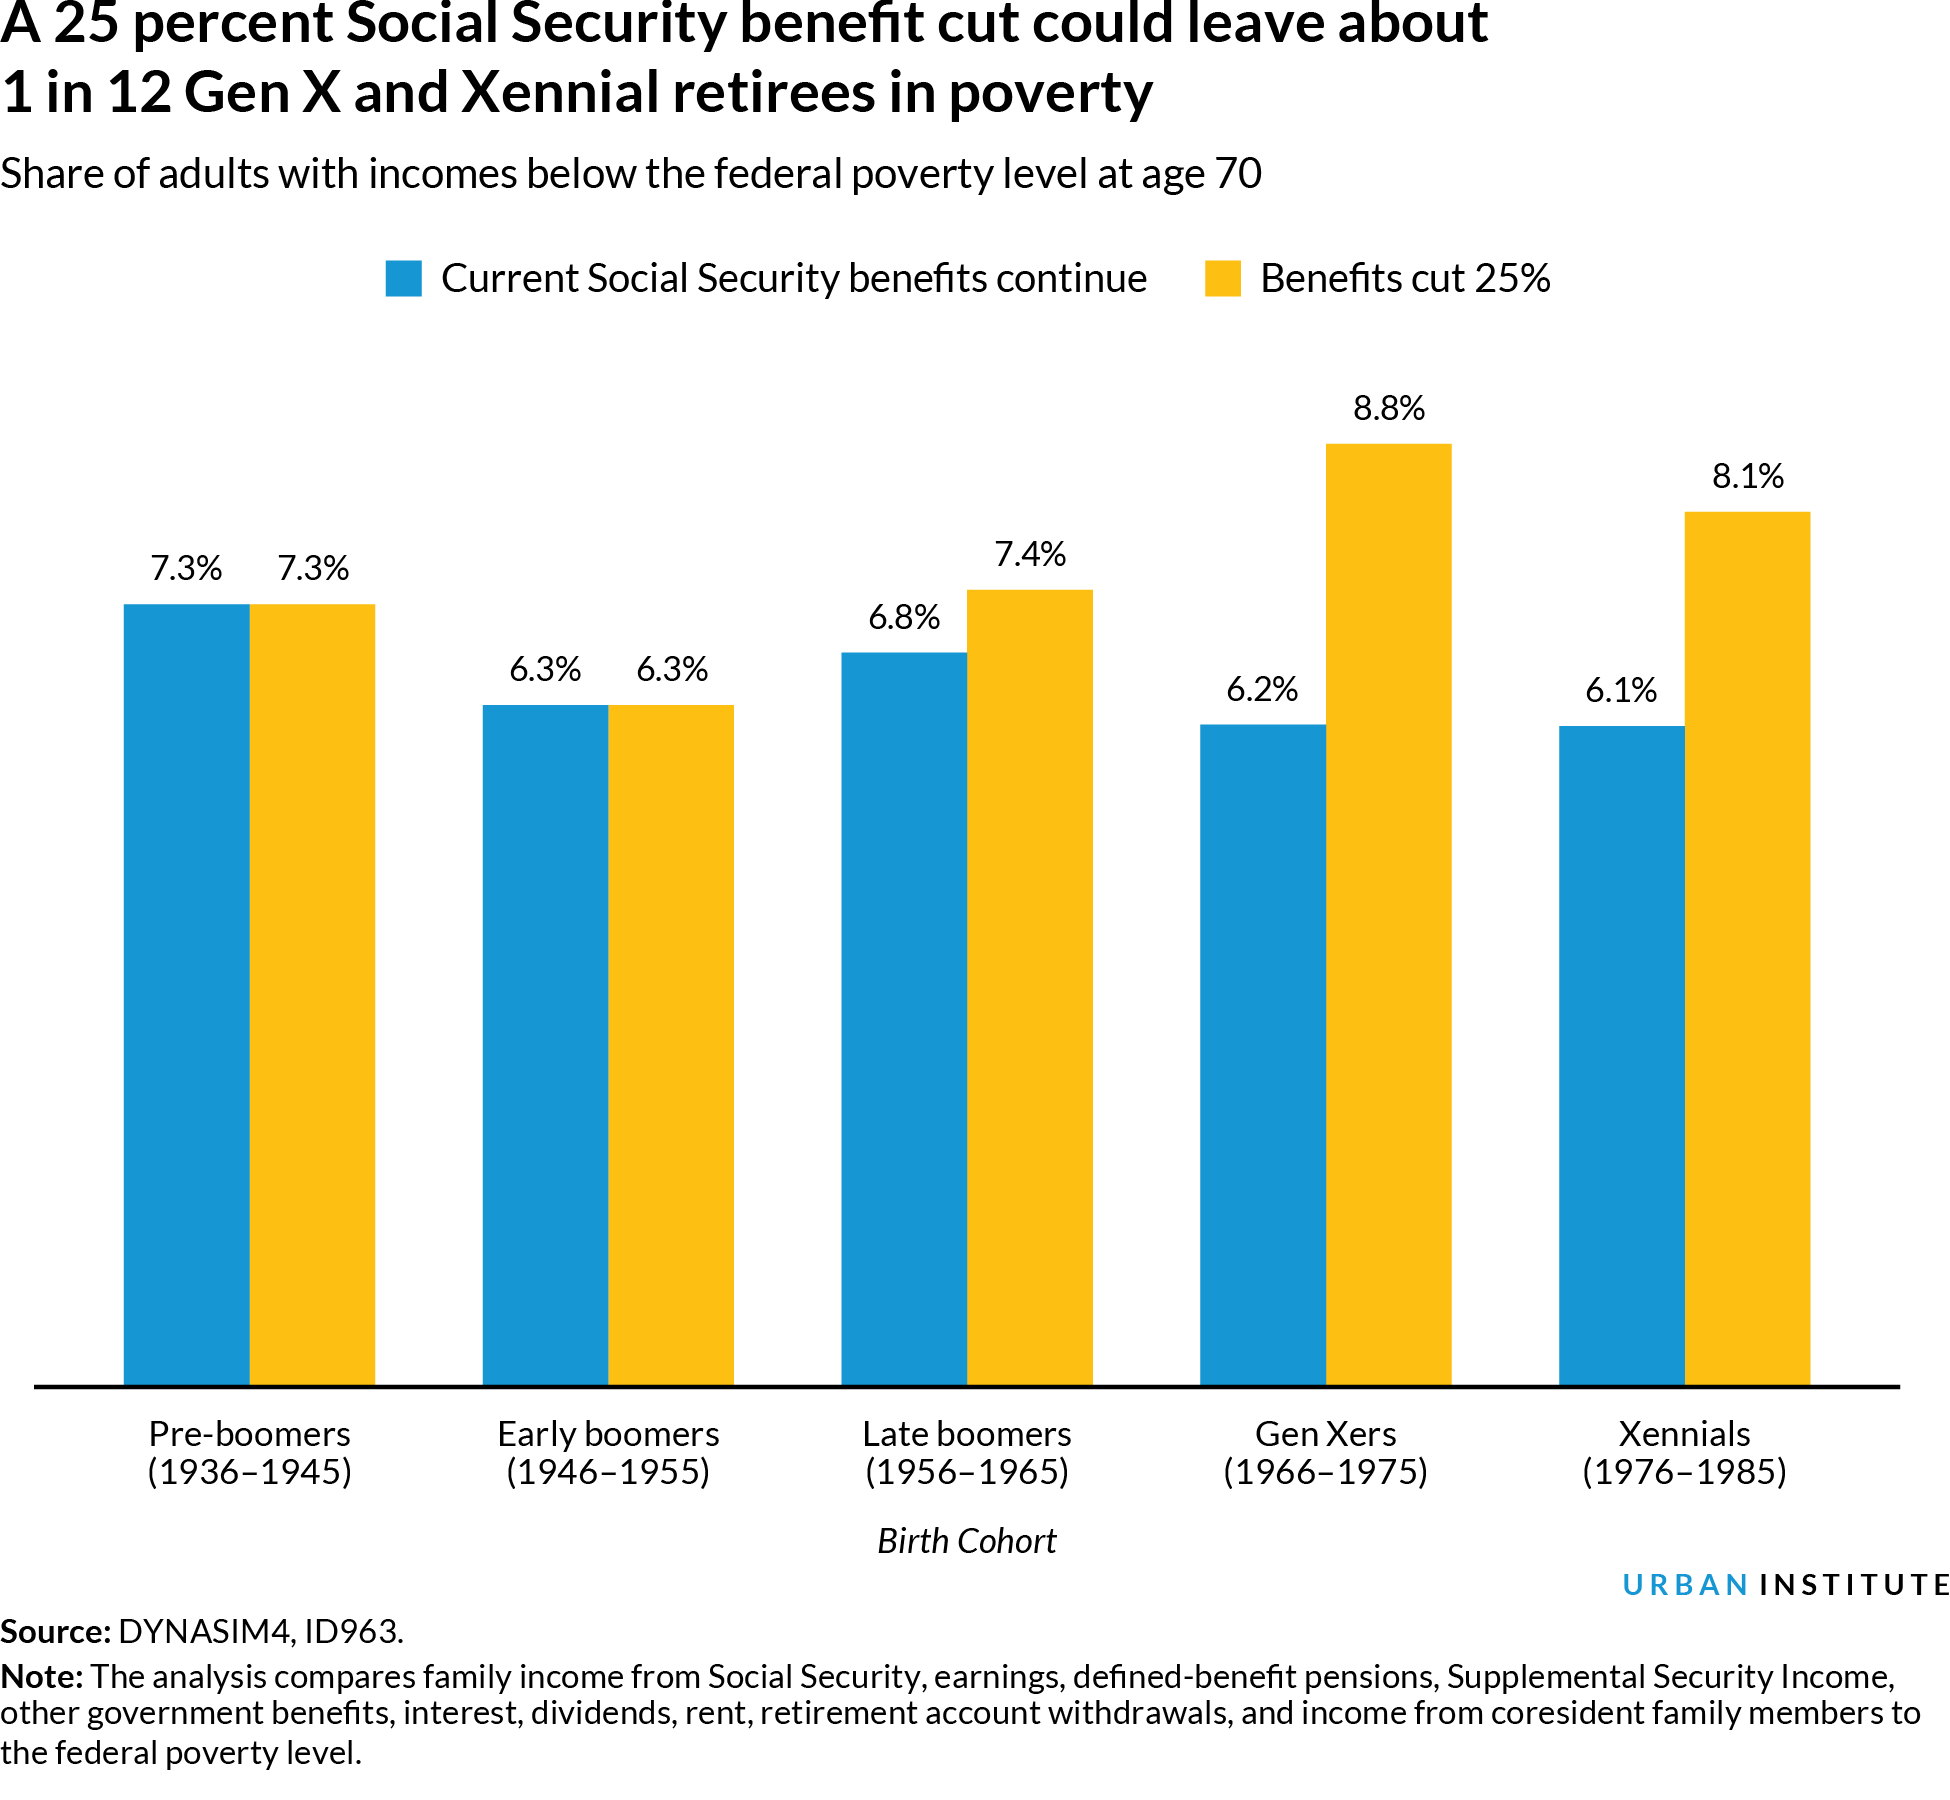 A 25 percent Social Security benefit cut could leave about 1 in 12 Gen X and Xennial retirees in poverty, Share of adults with incomes below the federal poverty level at age 70